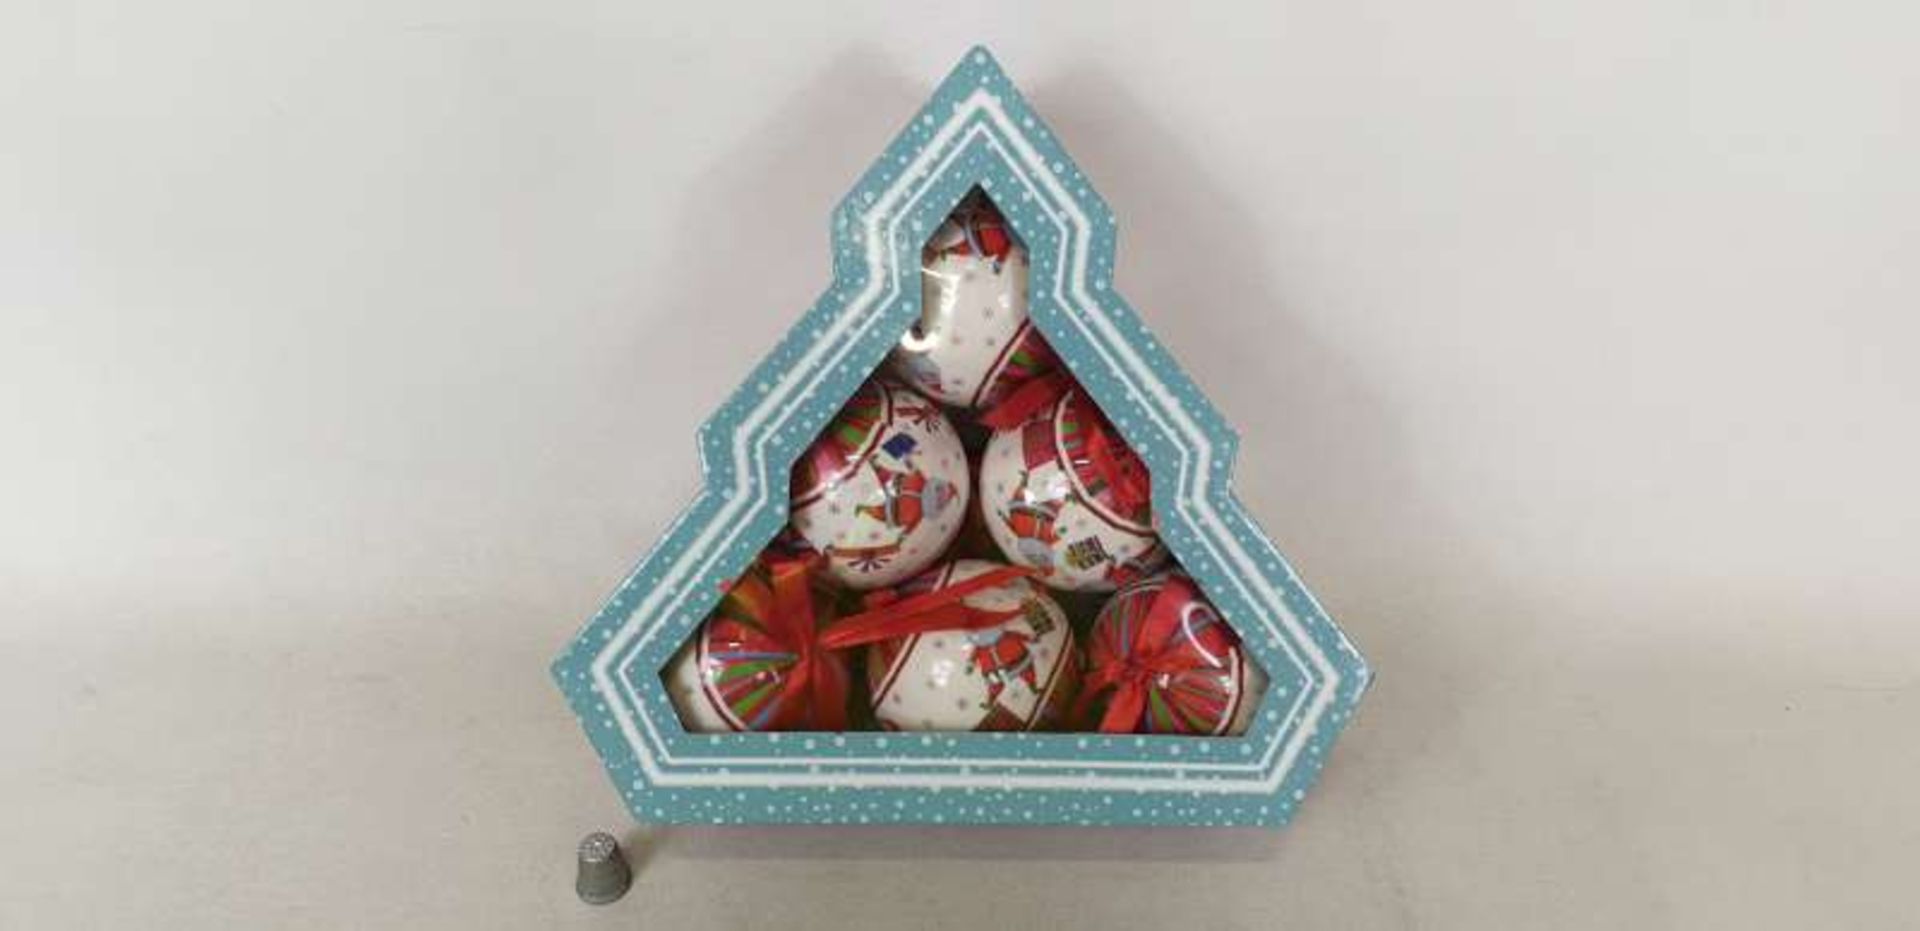 48 X SETS OF 6 FATHER CHRISMAS BAUBLES IN DECORATIVE TREE BOX IN 3 BOXES